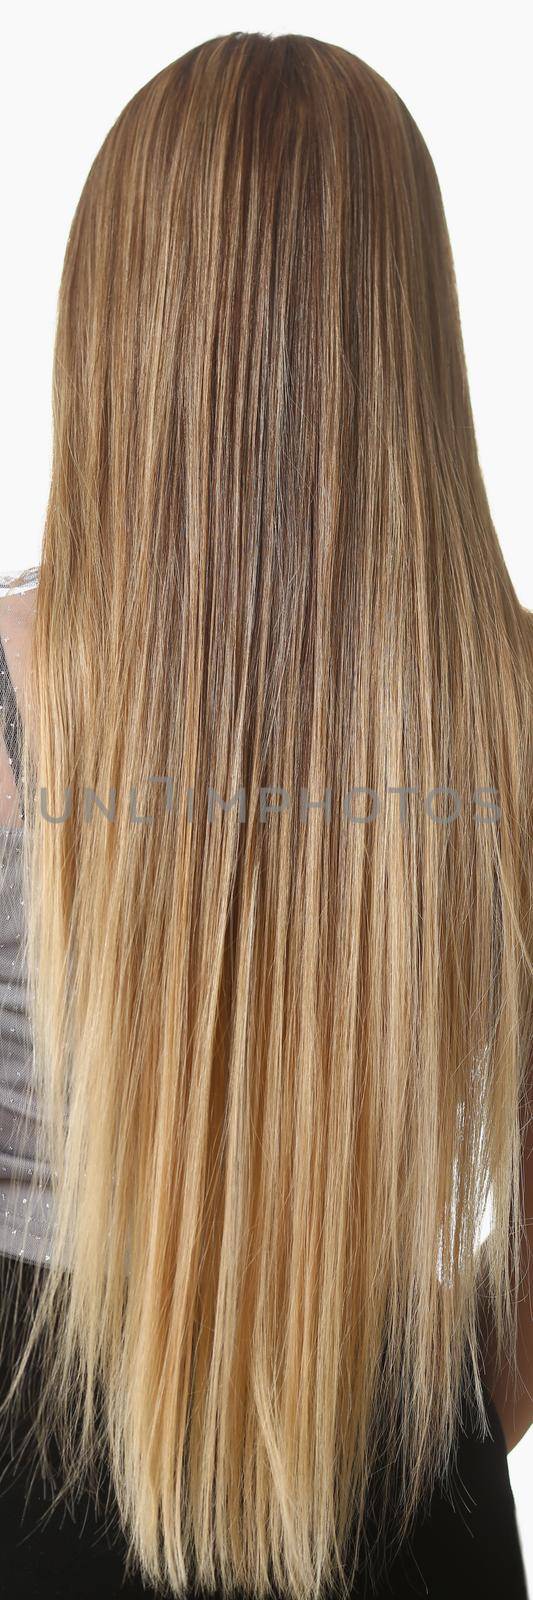 Close-up of womans back and long luxury shiny blonde hair, female after beauty salon. Glossy colour of hair, shiny hairstyle. Wellness, self love concept